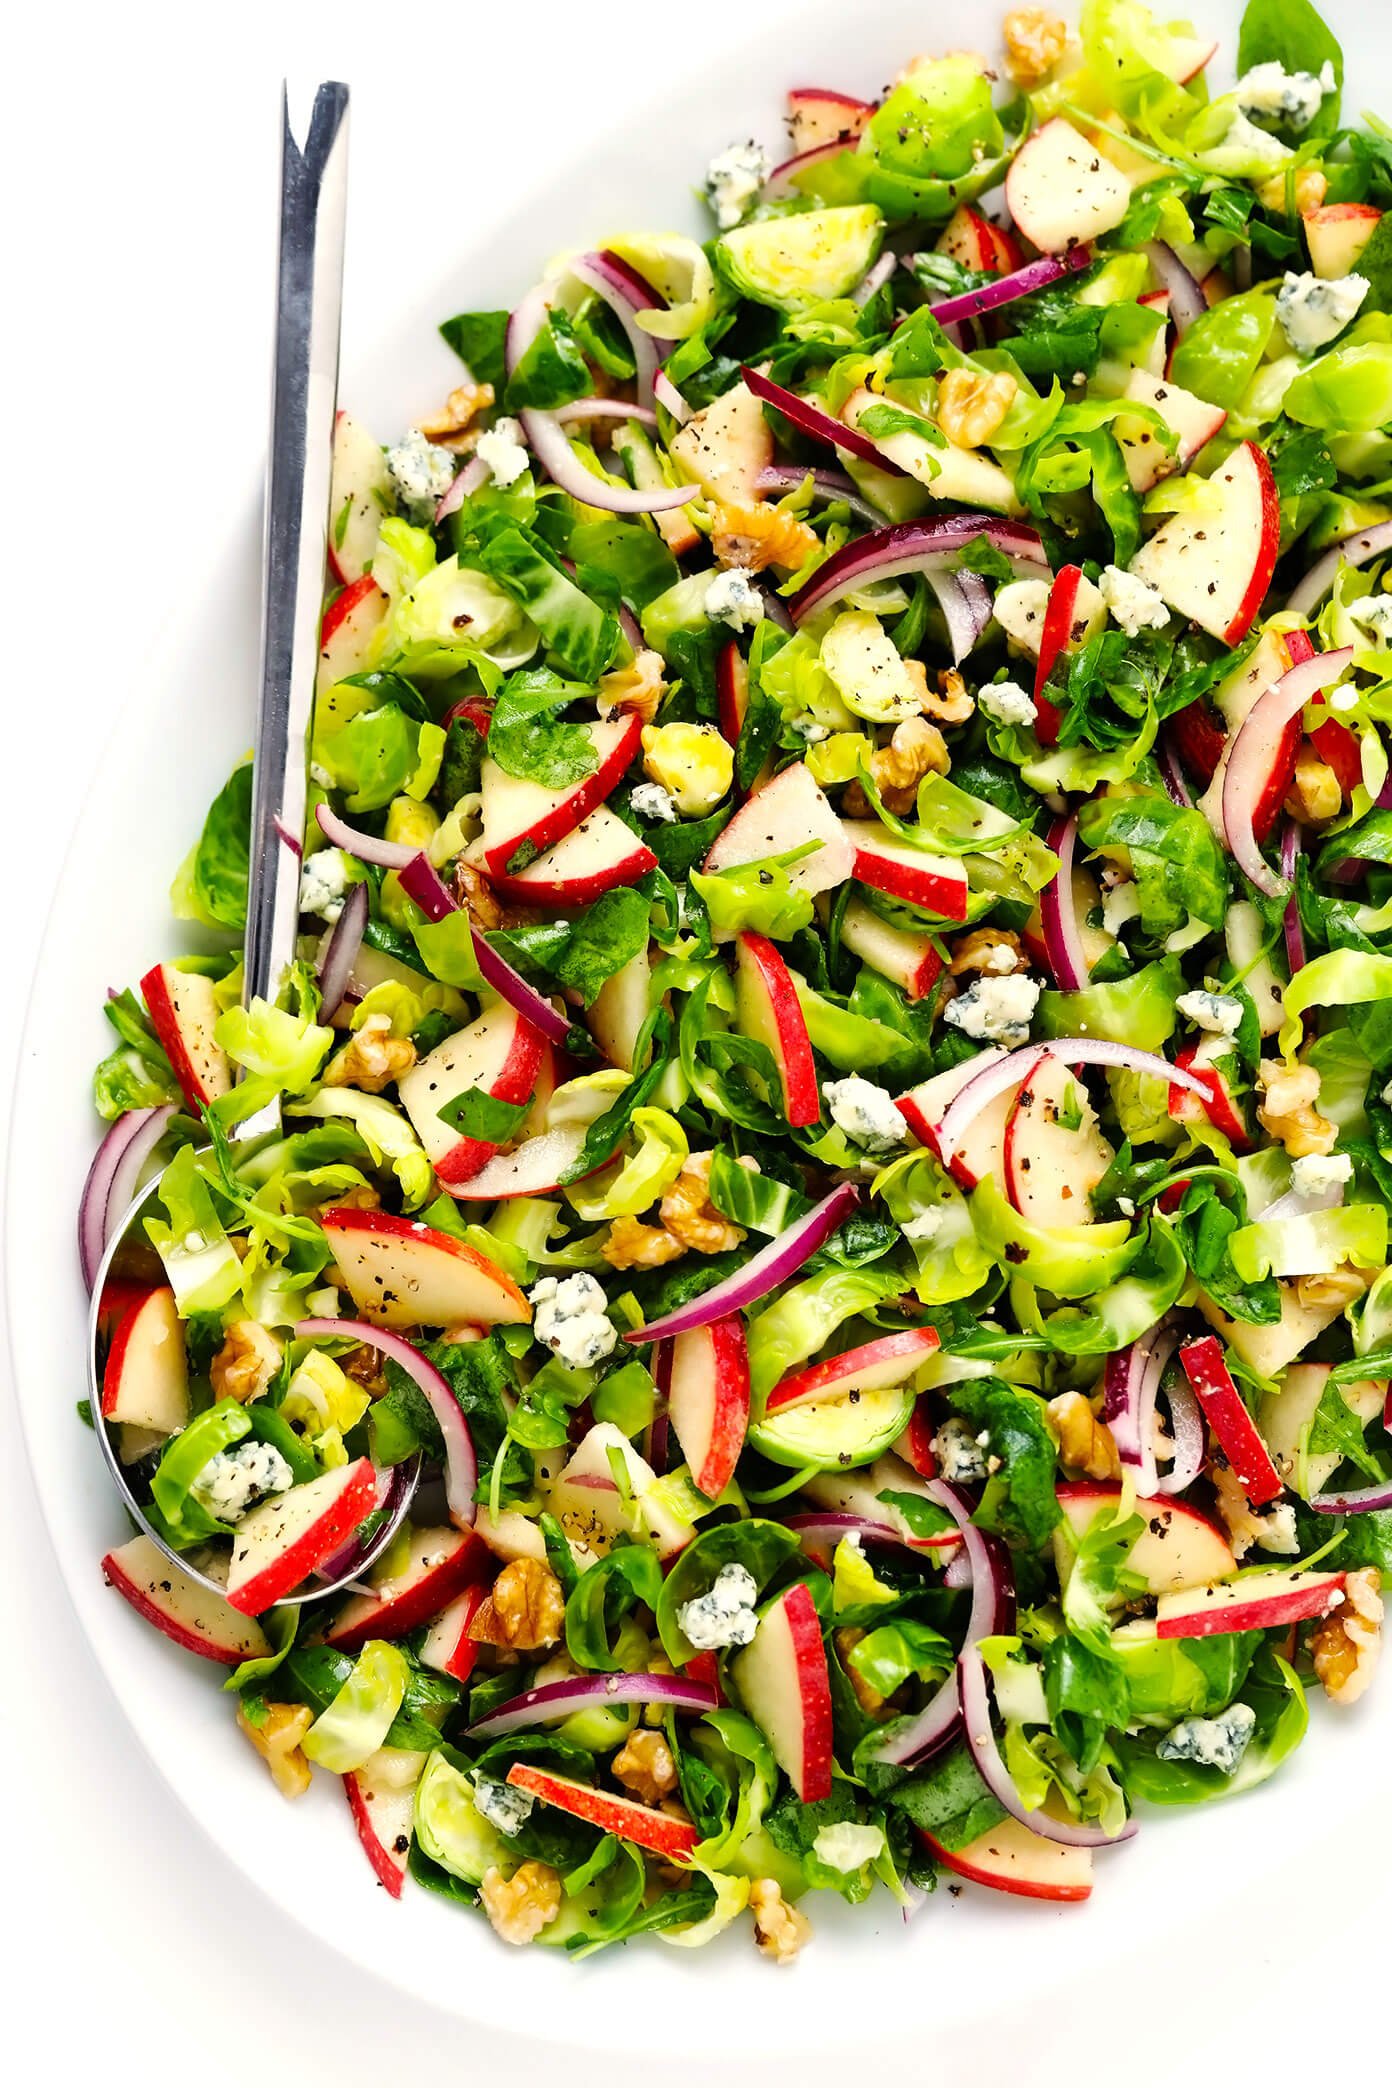 Brussels Sprouts Salad with Apples, Walnuts and Blue Cheese in Serving Bowl